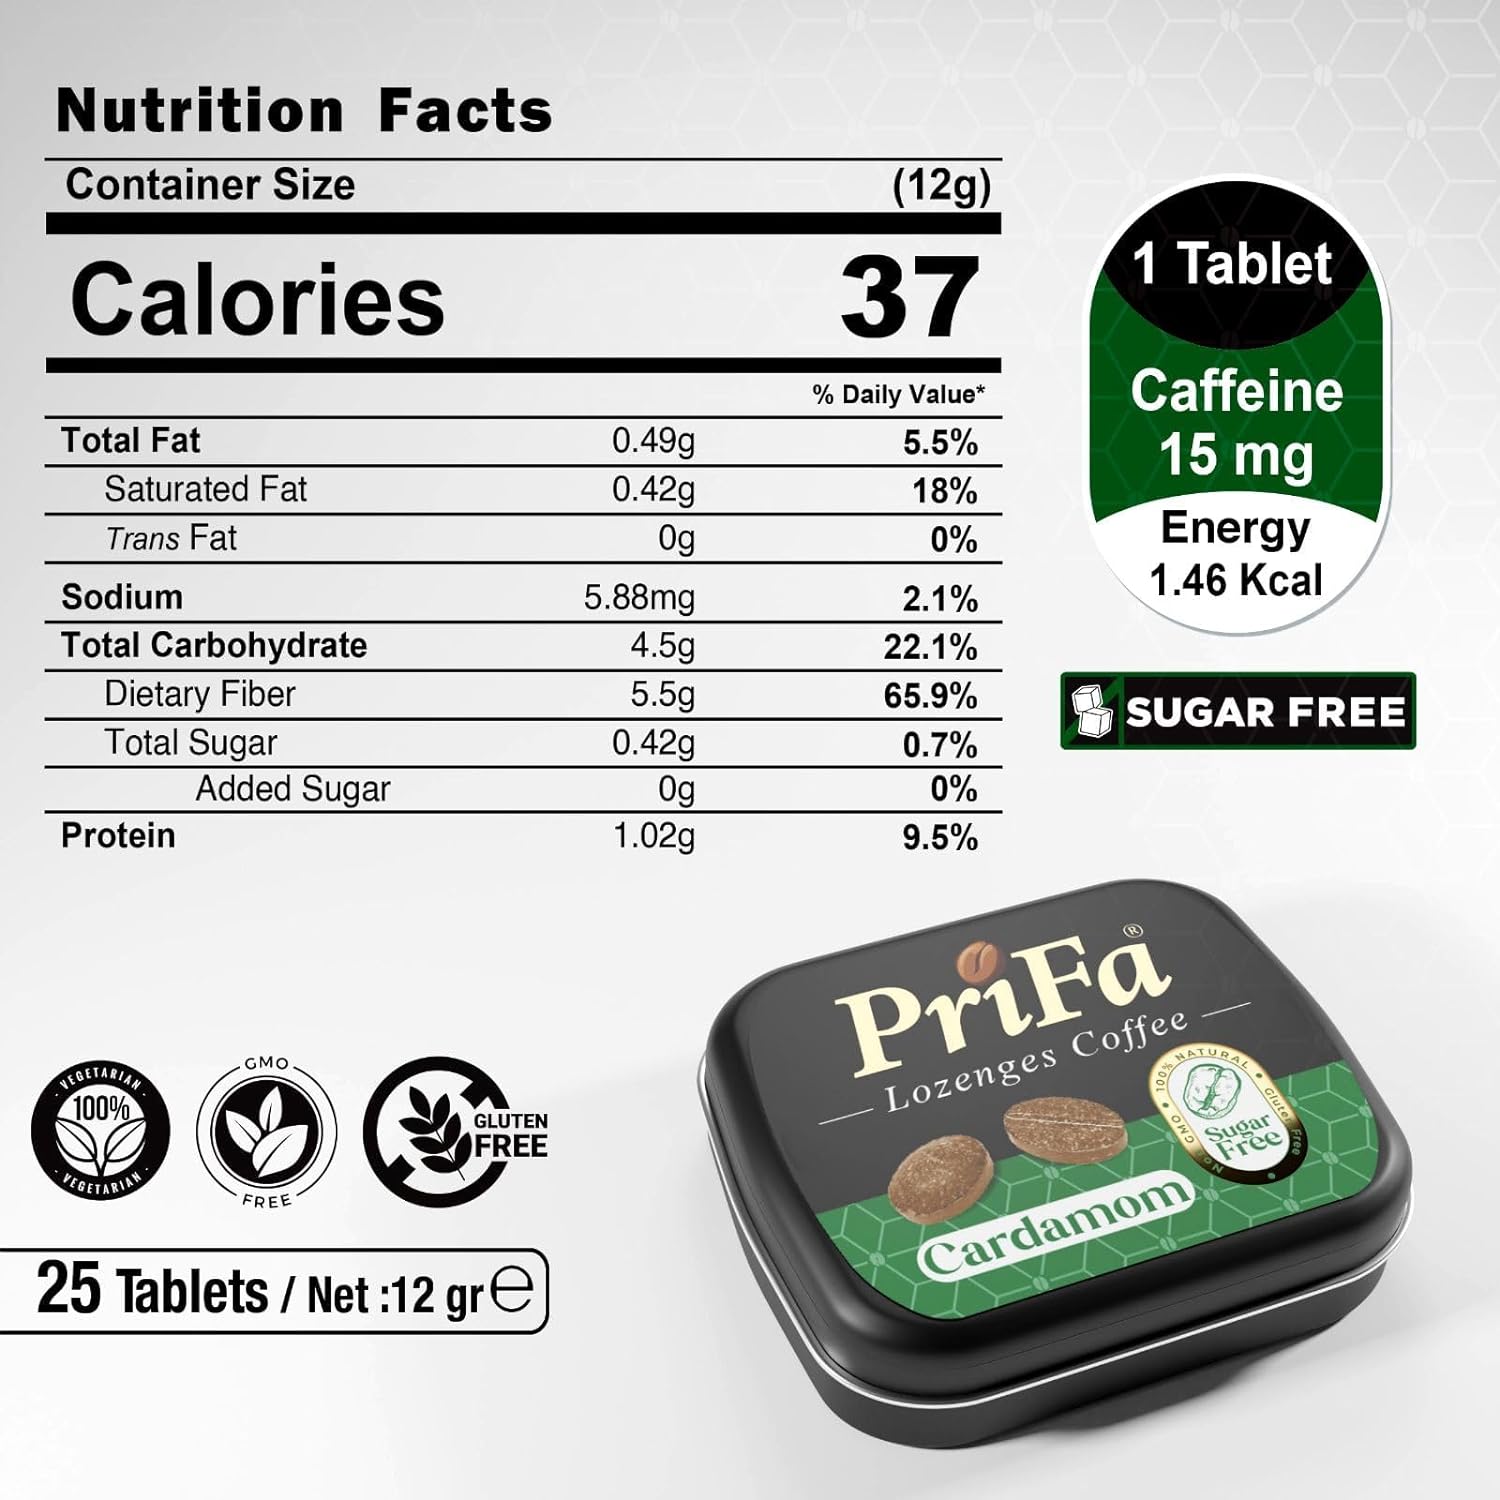 Nutrition facts label and packaging for PriFa Cardamom coffee lozenges, highlighting caffeine content and dietary information.